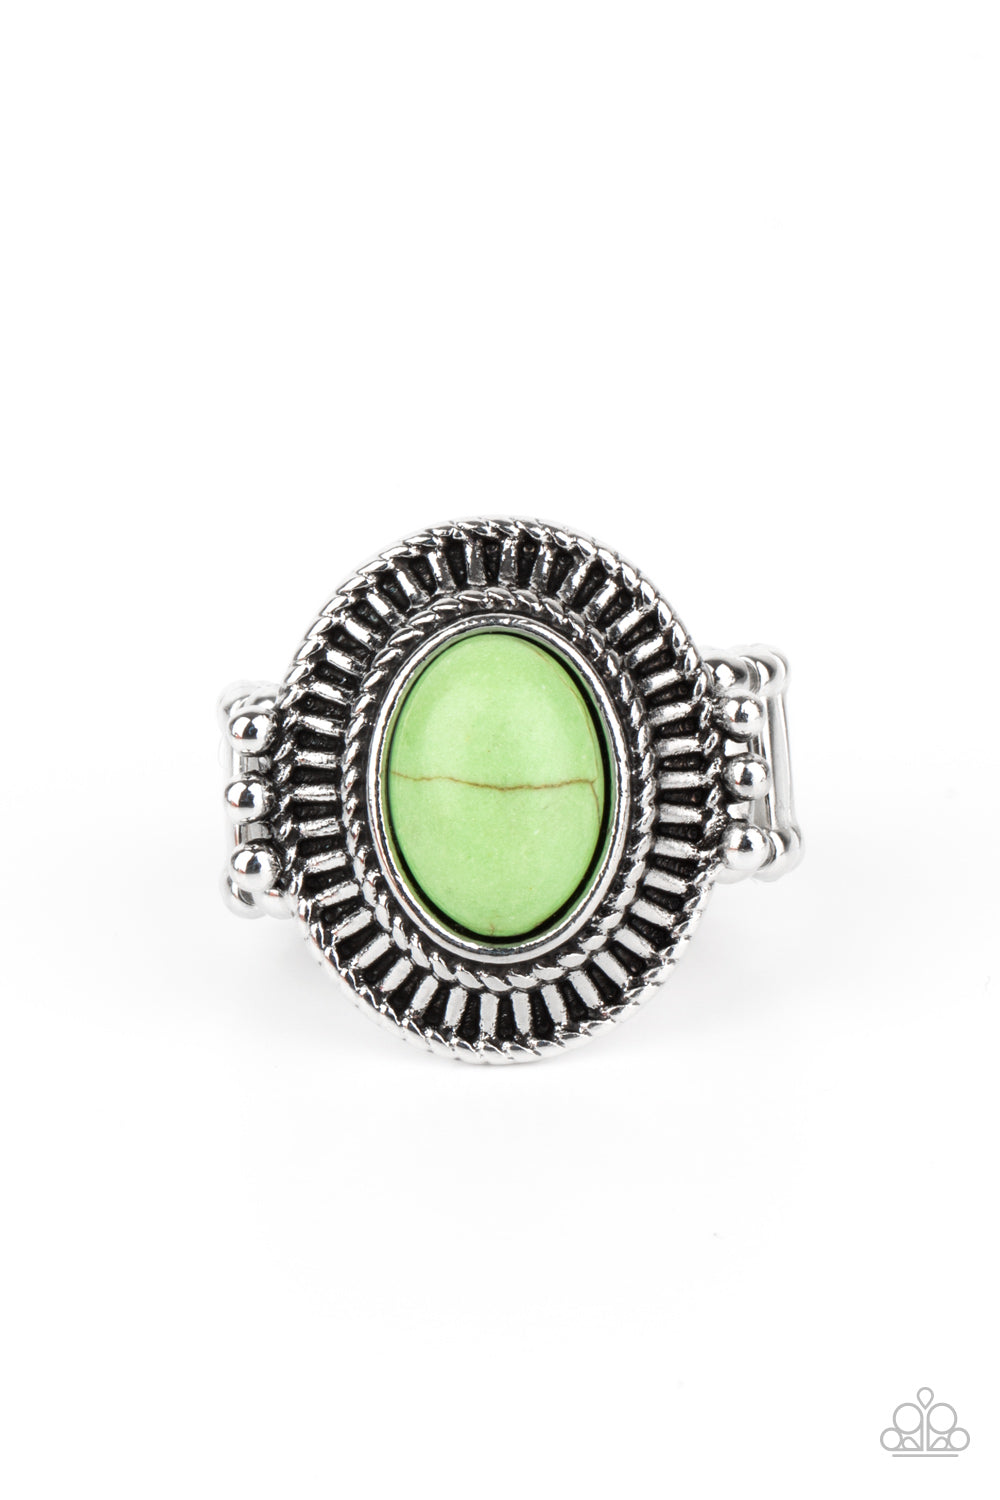 BADLANDS To The Bone - Green Stone Ring- Paparazzi Accessories